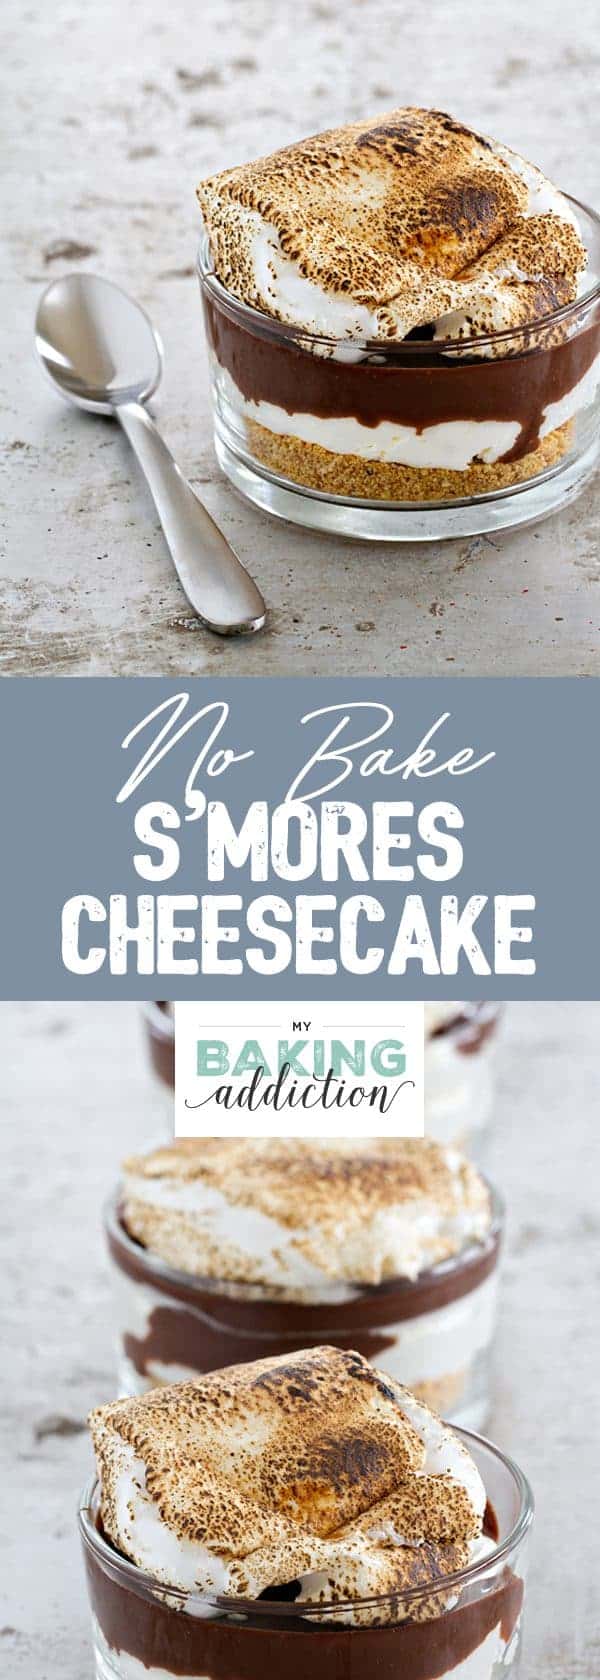 No Bake S'mores Cheesecake is topped with a silky layer of ganache and a giant roasted marshmallow.  Your family will be raving about this dessert for a very long time!